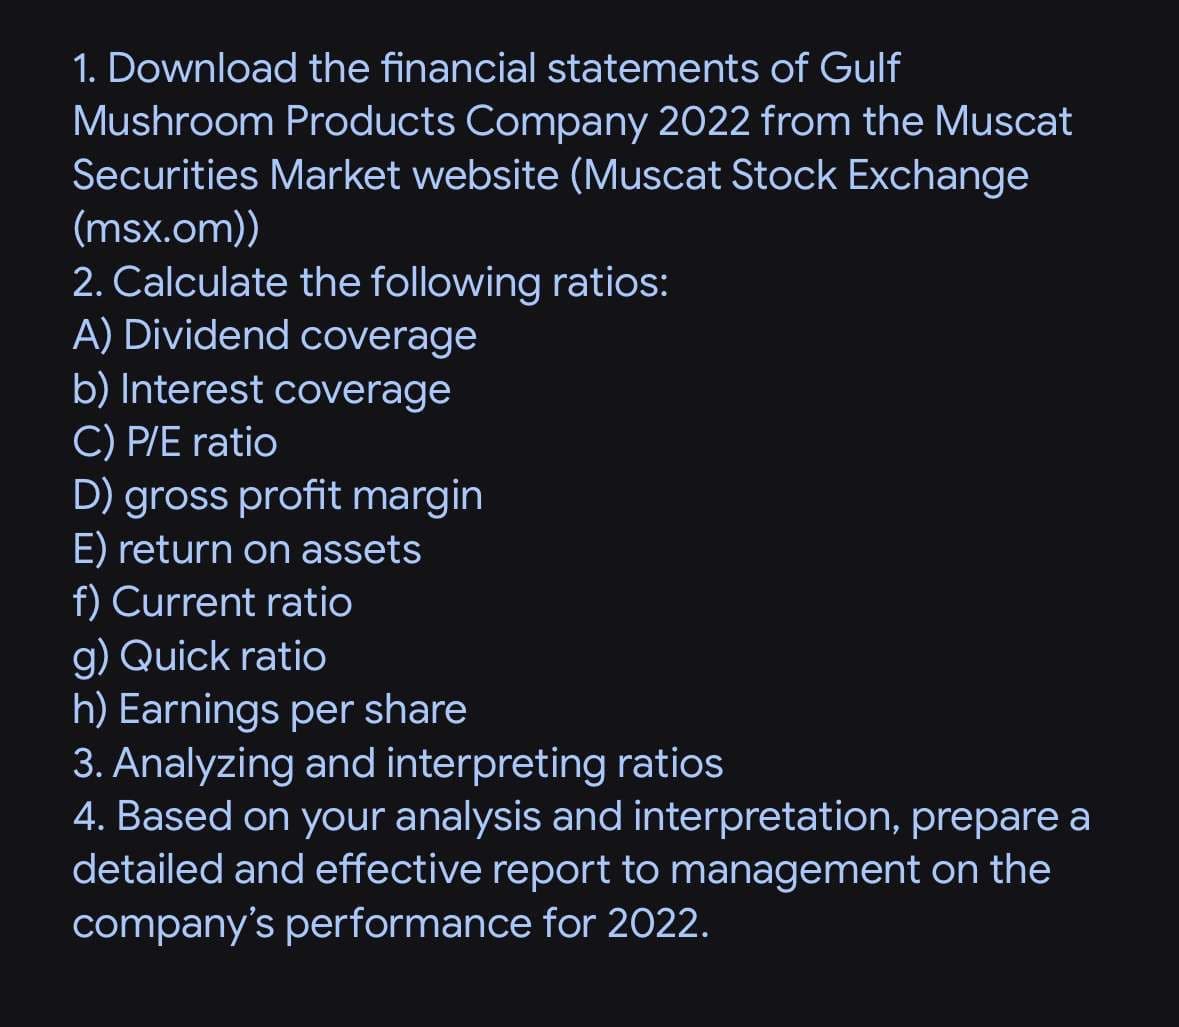 1. Download the financial statements of Gulf
Mushroom Products Company 2022 from the Muscat
Securities Market website (Muscat Stock Exchange
(msx.om))
2. Calculate the following ratios:
A) Dividend coverage
b) Interest coverage
C) P/E ratio
D) gross profit margin
E) return on assets
f) Current ratio
g) Quick ratio
h) Earnings per share
3. Analyzing and interpreting ratios
4. Based on your analysis and interpretation, prepare a
detailed and effective report to management on the
company's performance for 2022.